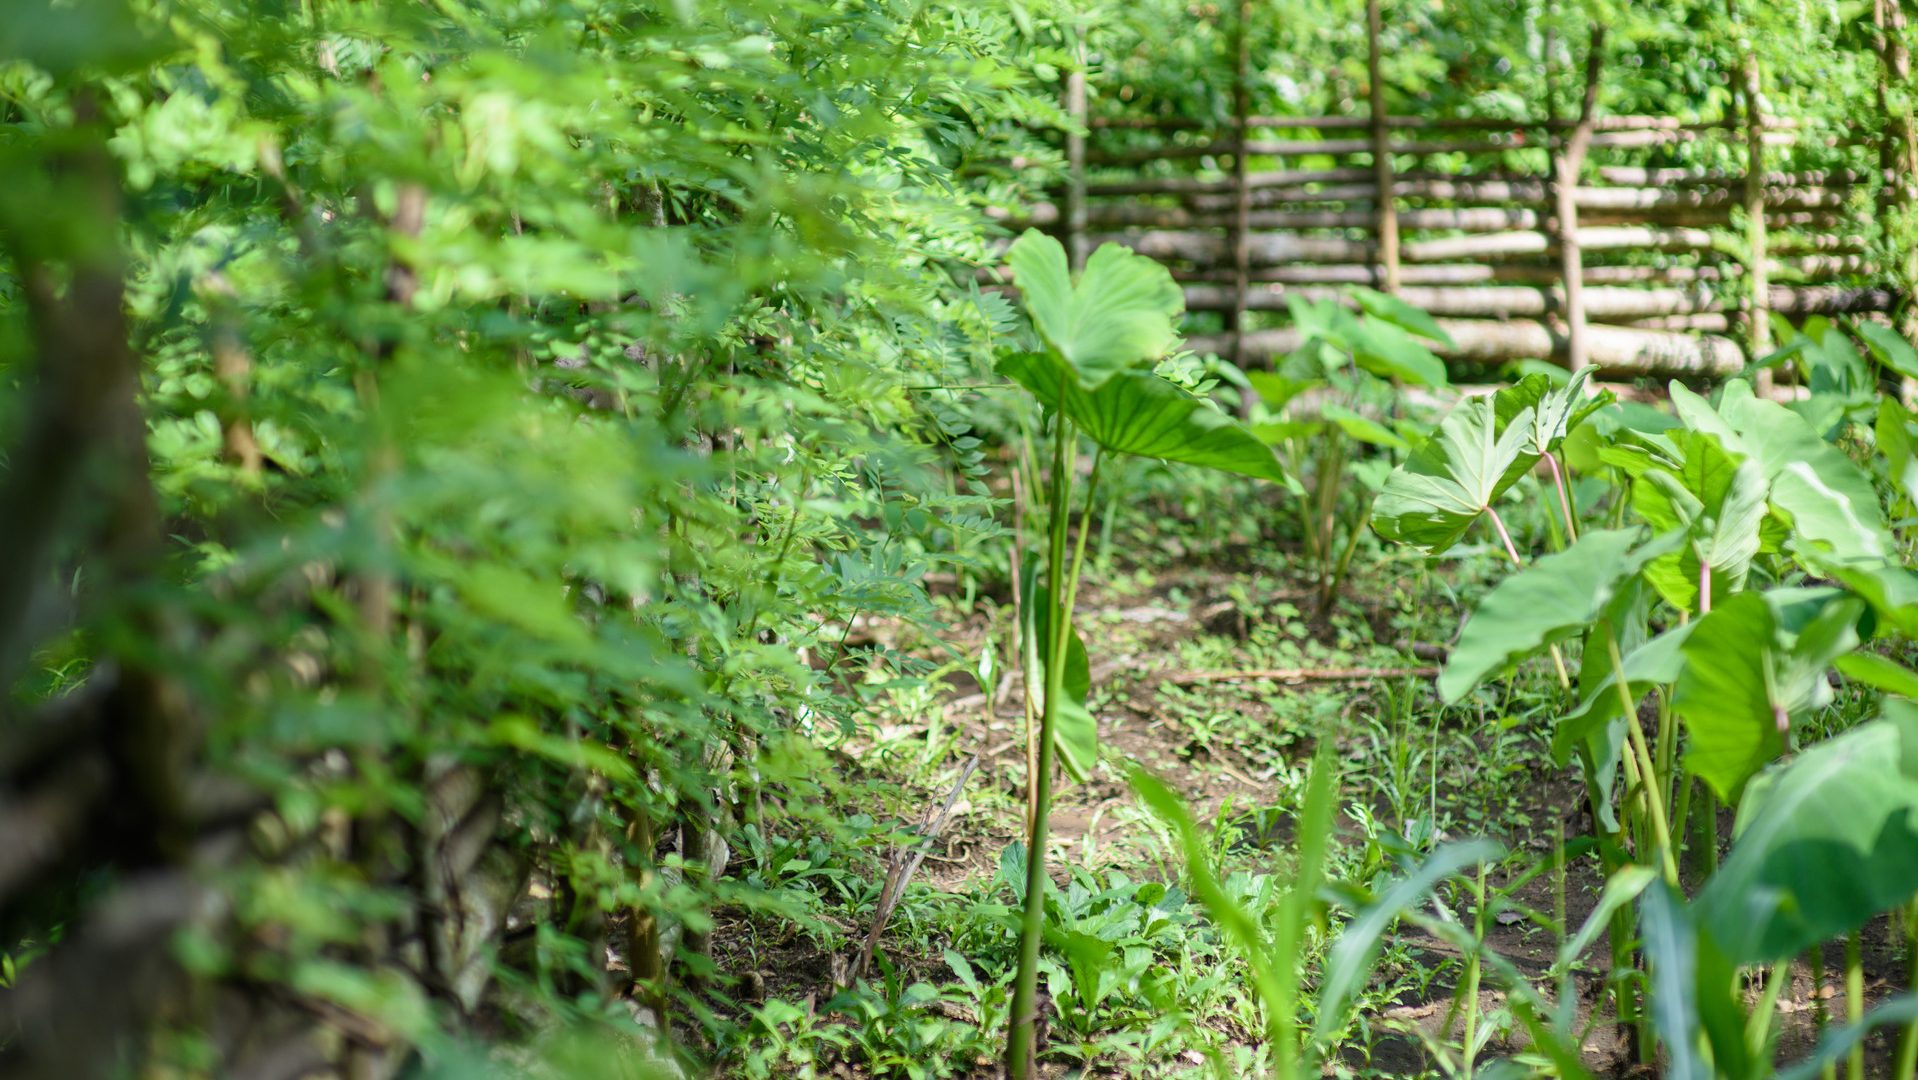 Food Garden in Gadaisu Villiage, PNG. A plant shoot is in focus , behind is dense green foliage and a wooden fence in the background.